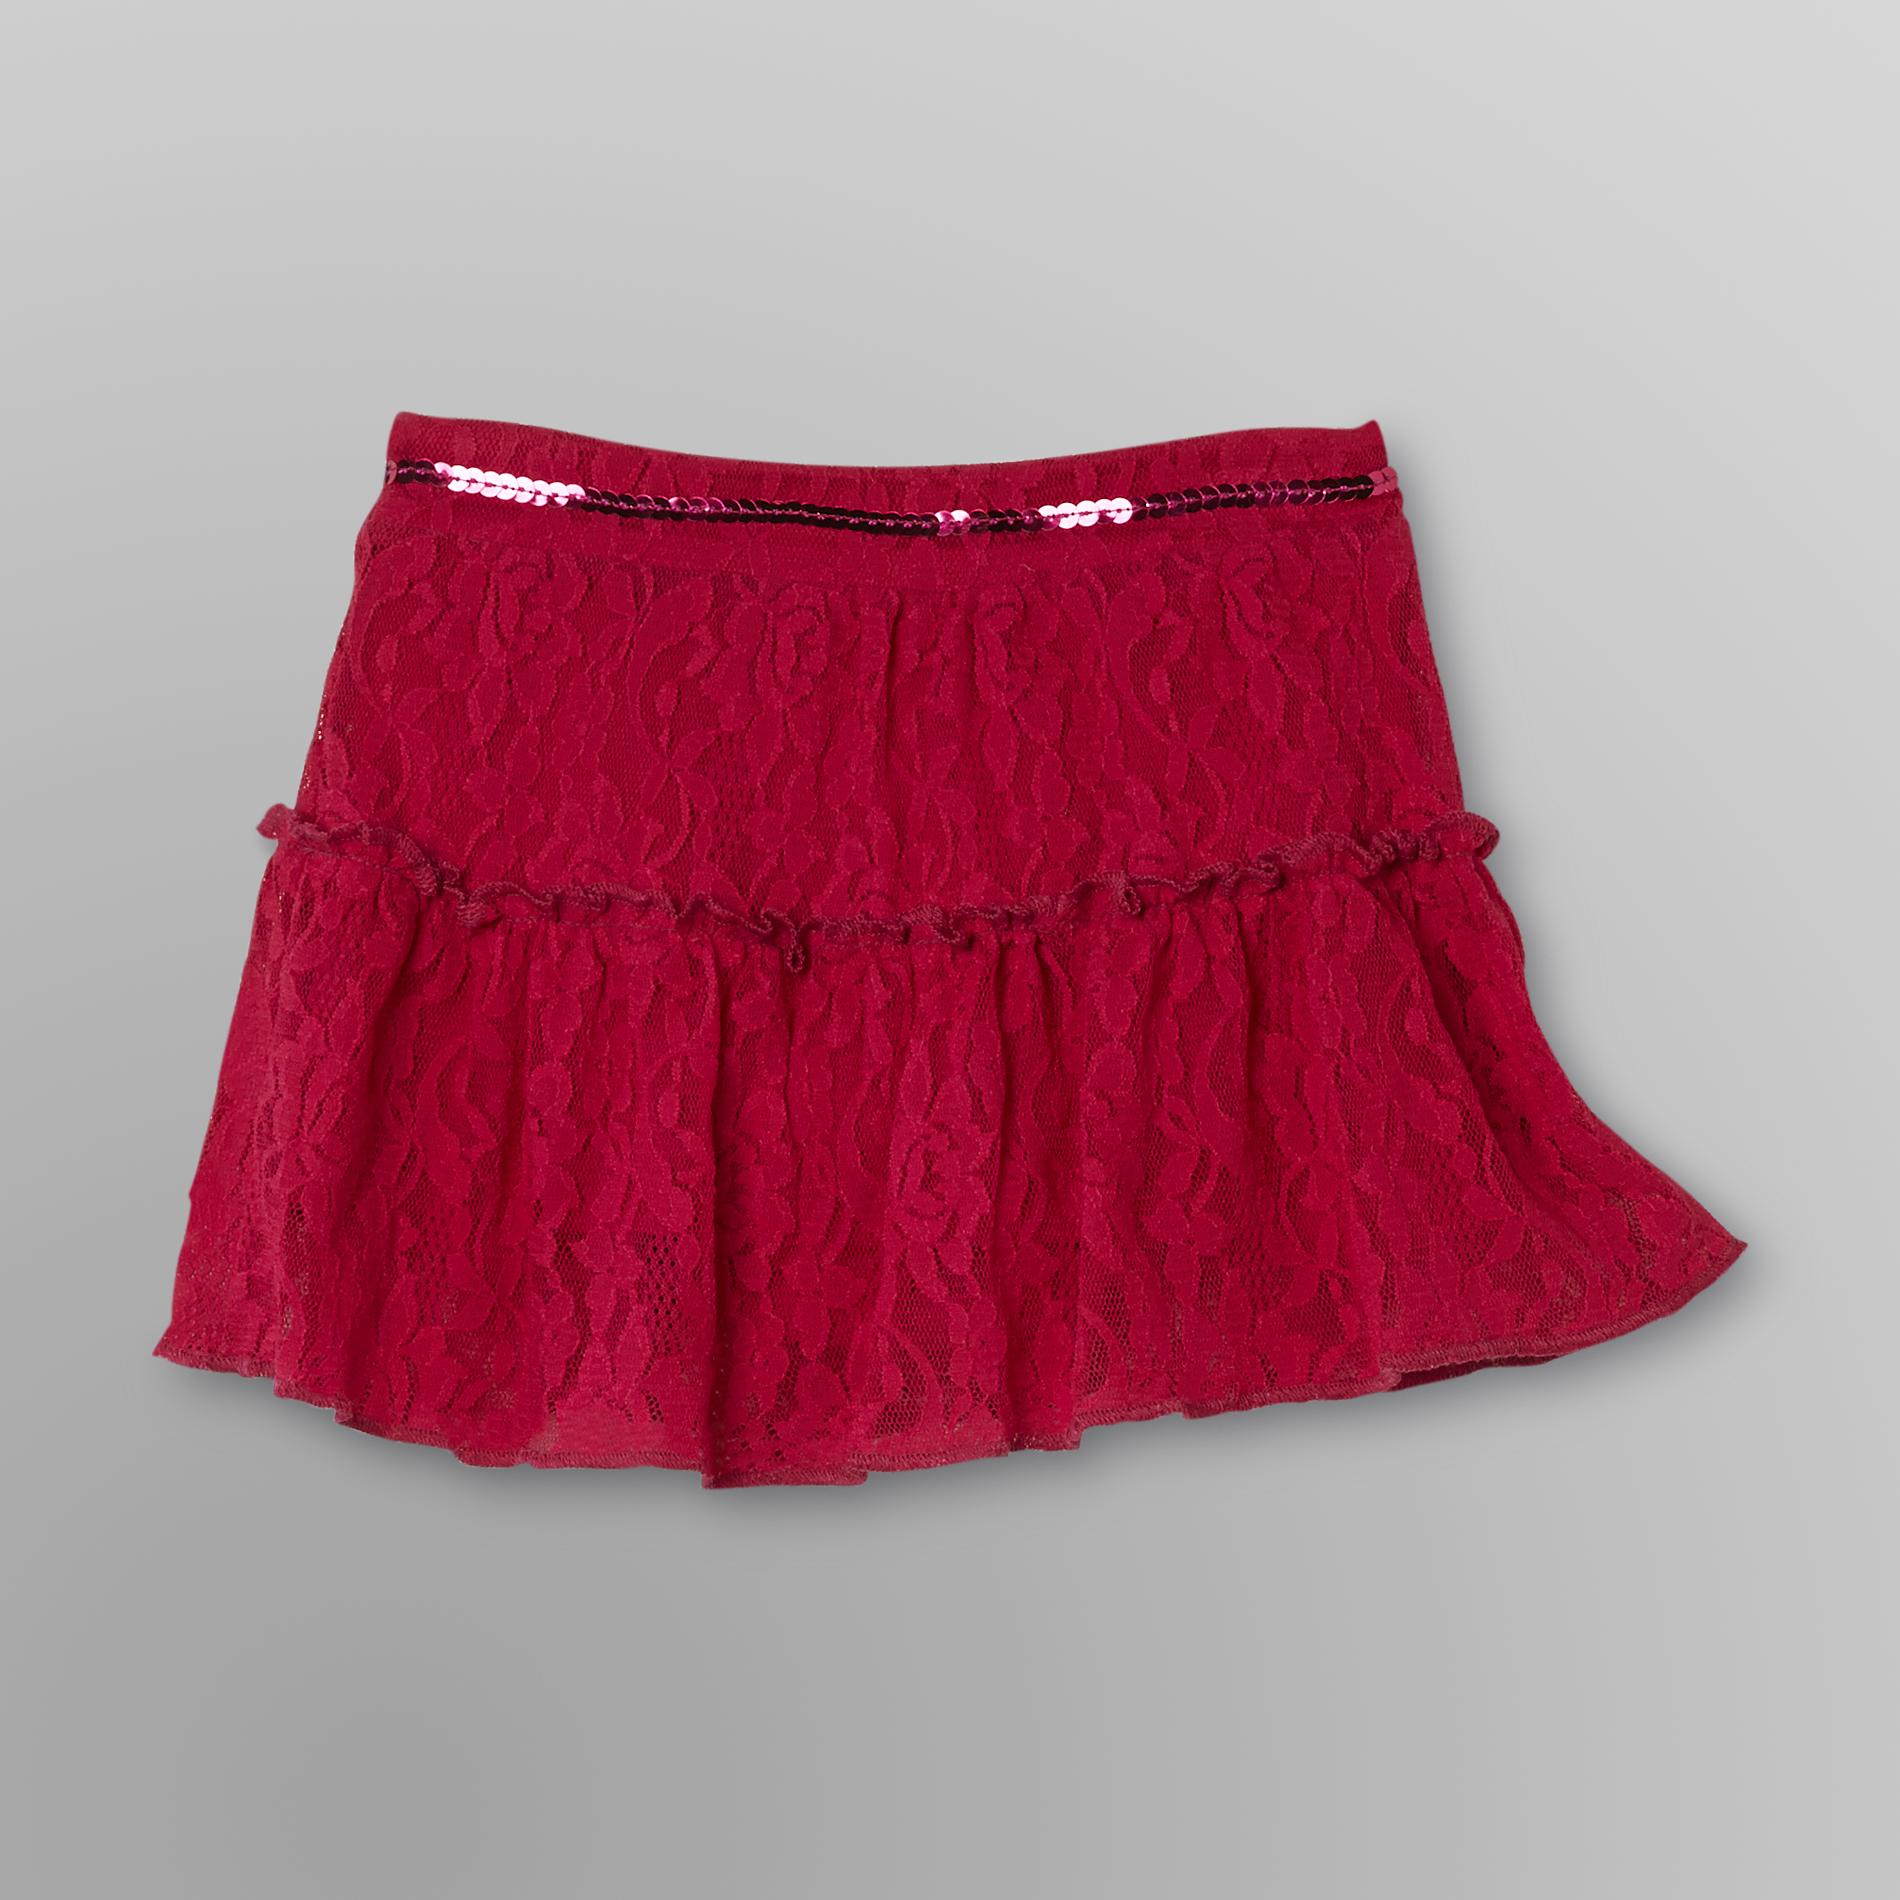 WonderKids Infant & Toddler Girl's Tiered Lace Scooter Skirt